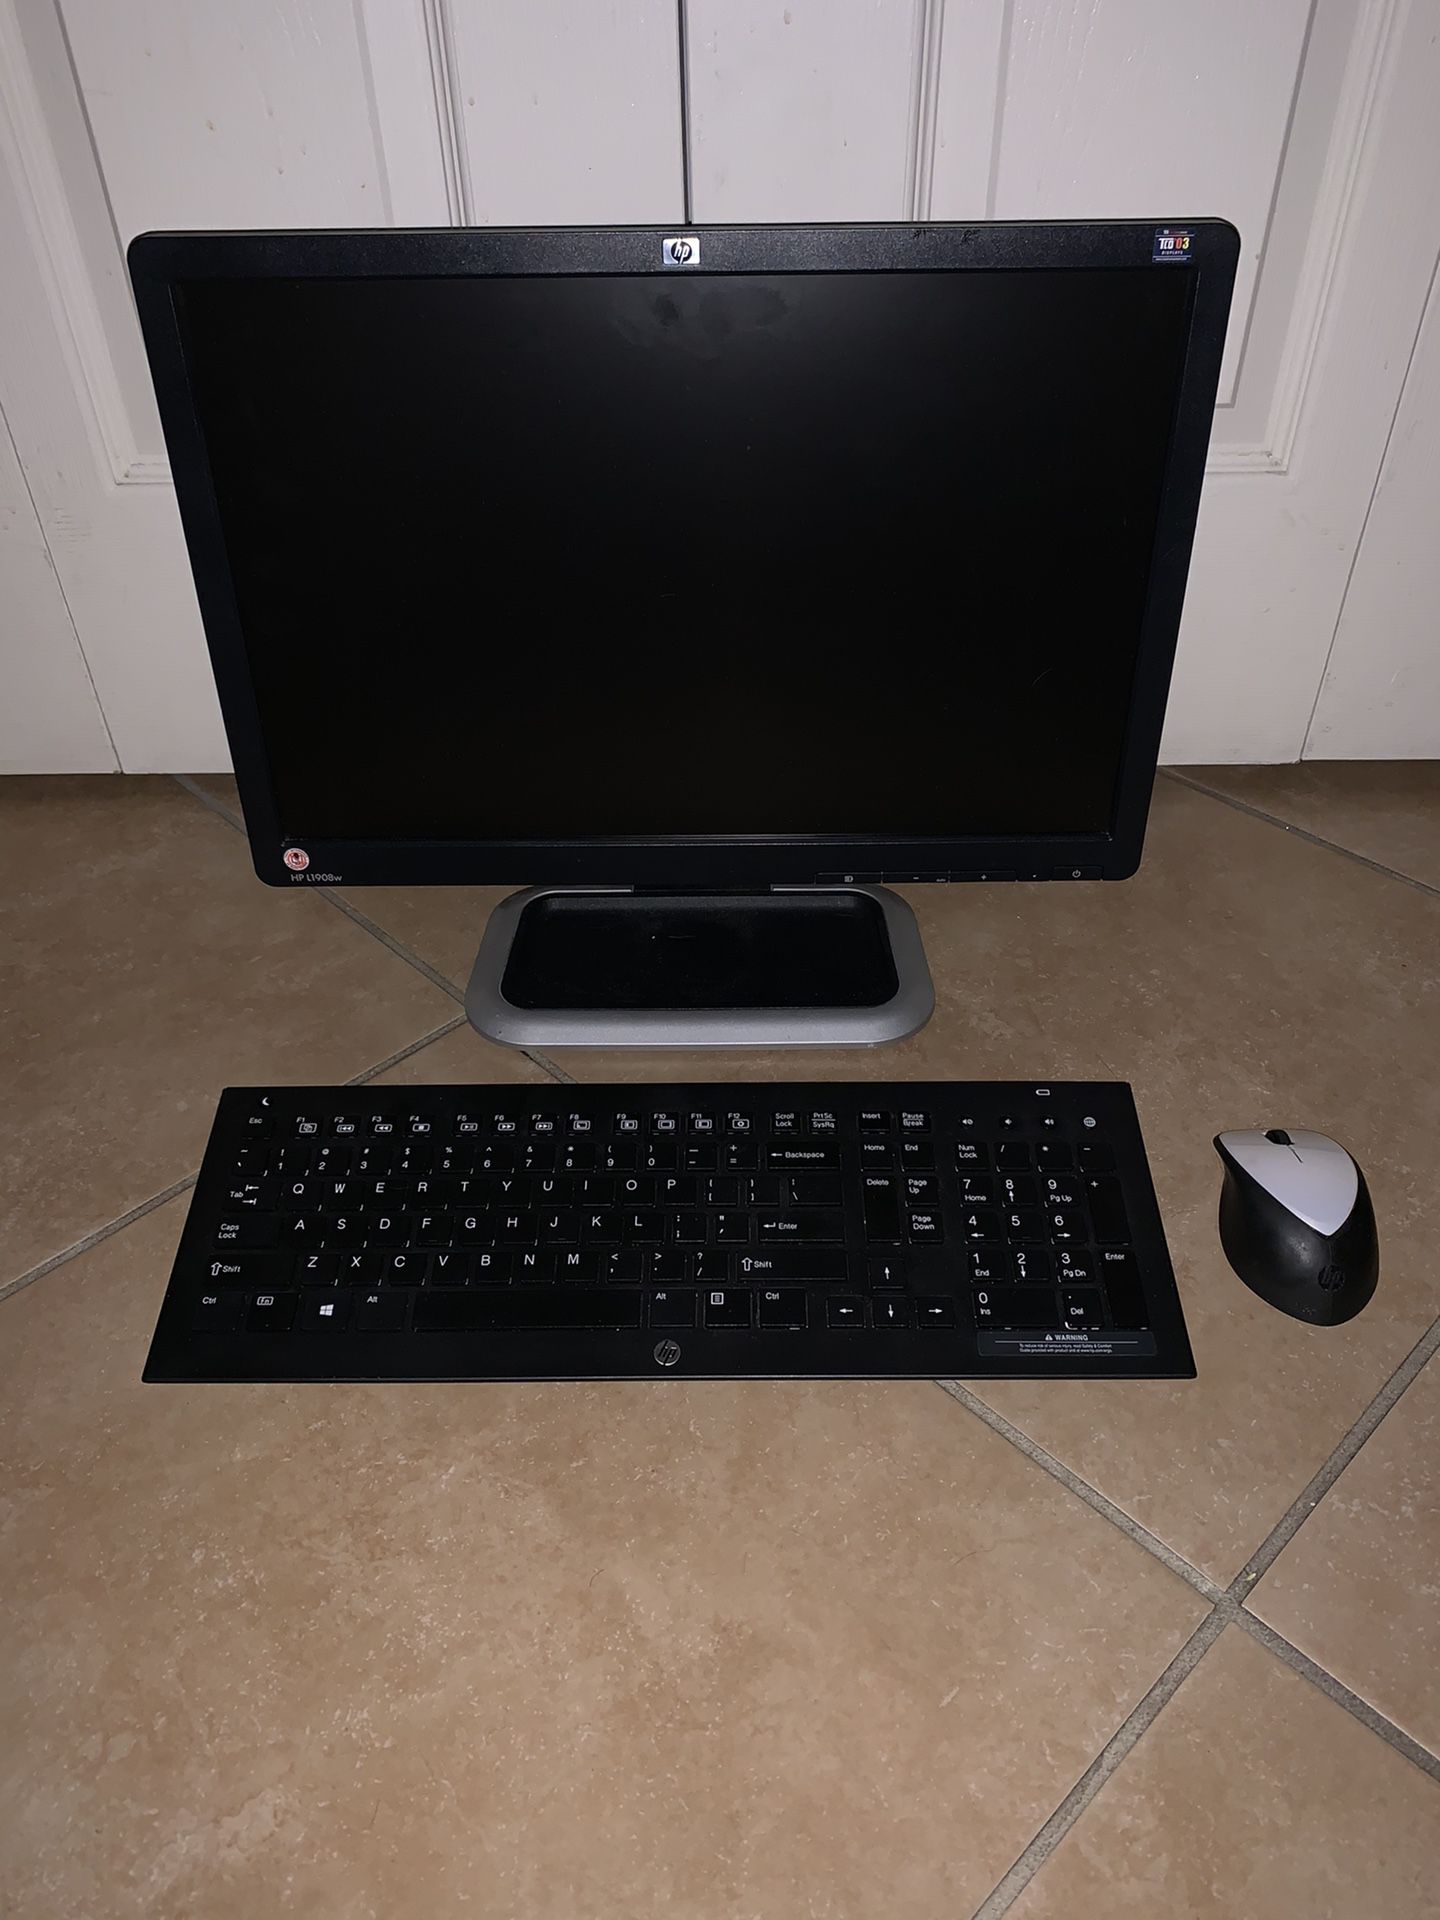 HP monitor, wireless keyboard, and wireless mouse only. NO COMPUTER